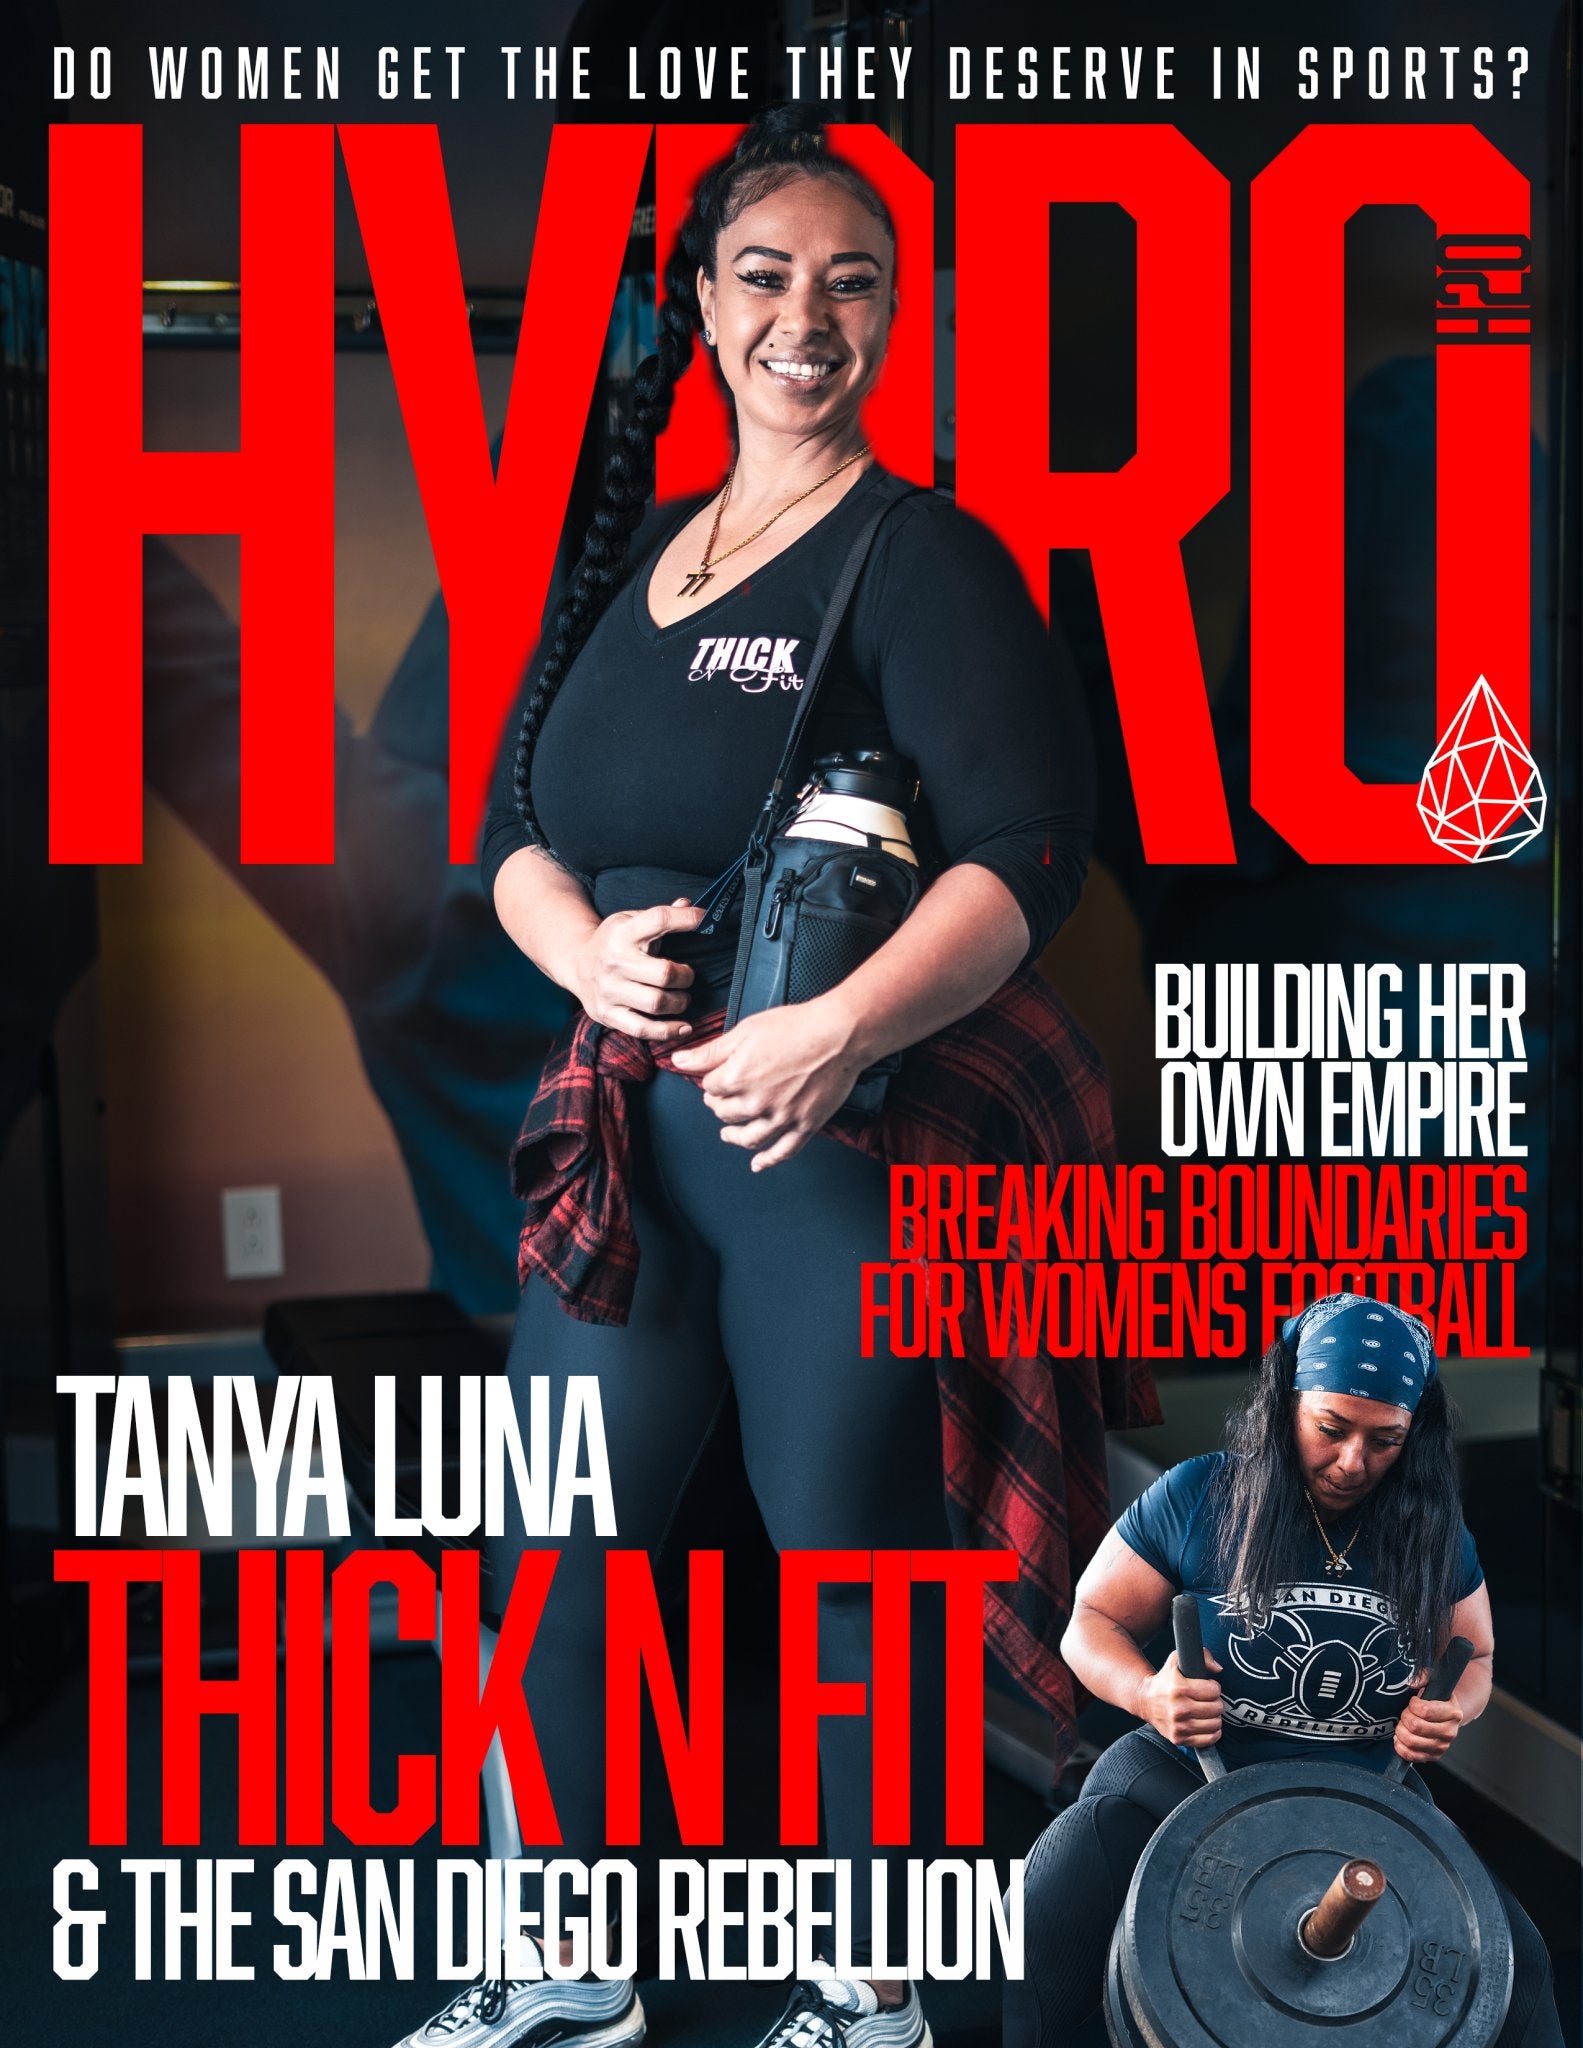 Tanya Luna: Building Her Own Empire - HydroH2o